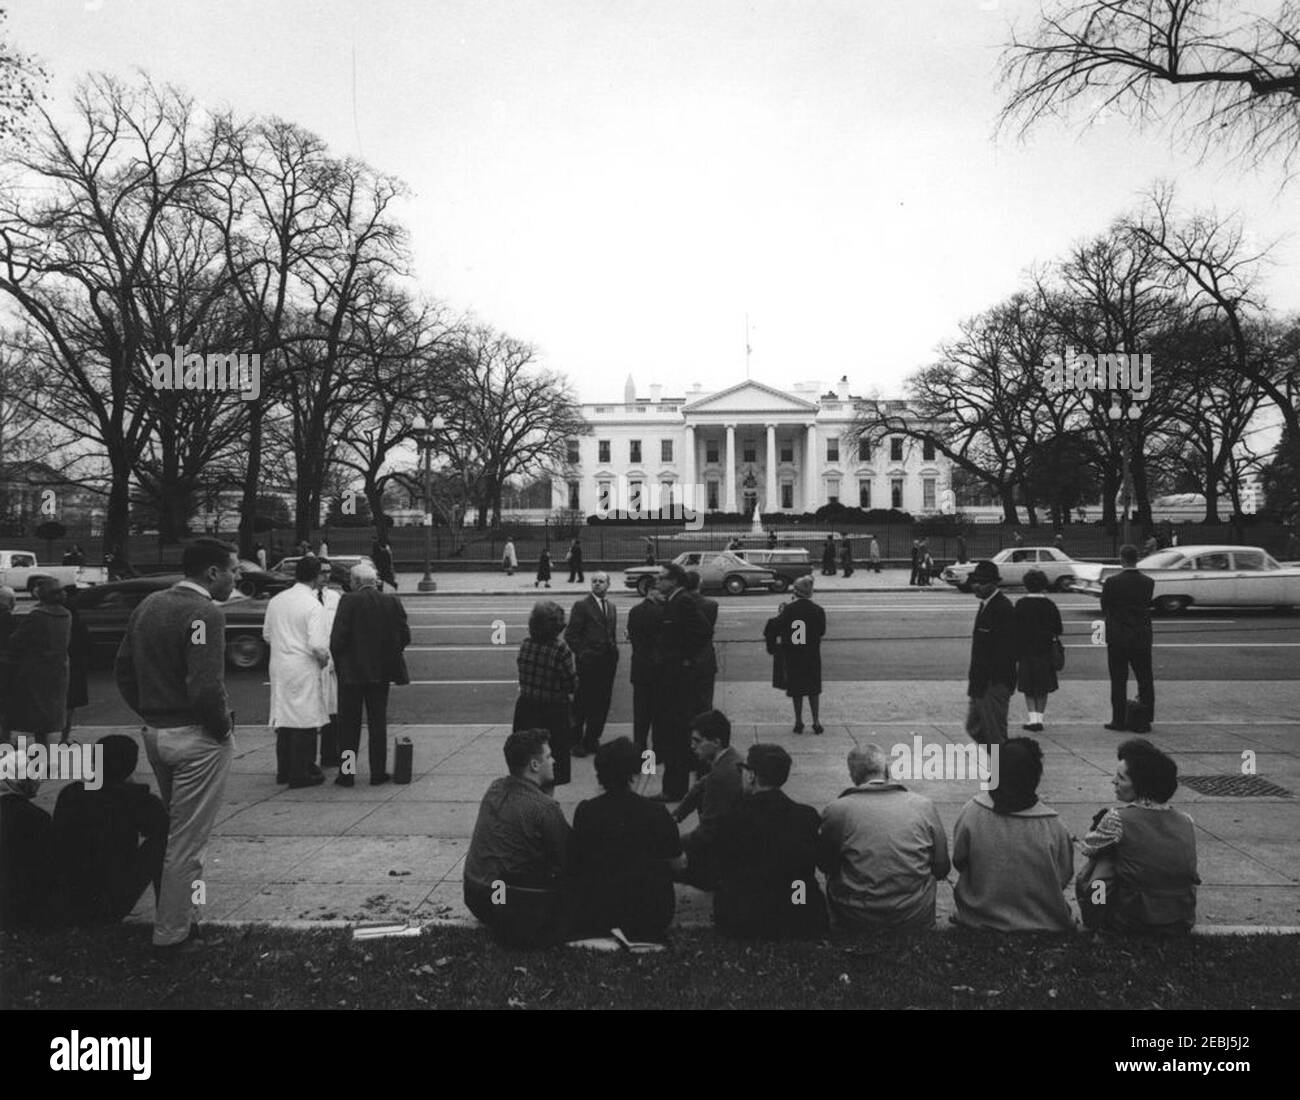 Washington, D.C., assassination reaction. Pedestrians gather on Pennsylvania Avenue in front of the White House, following news of the assassination of President John F. Kennedy. Washington, D.C. Stock Photo